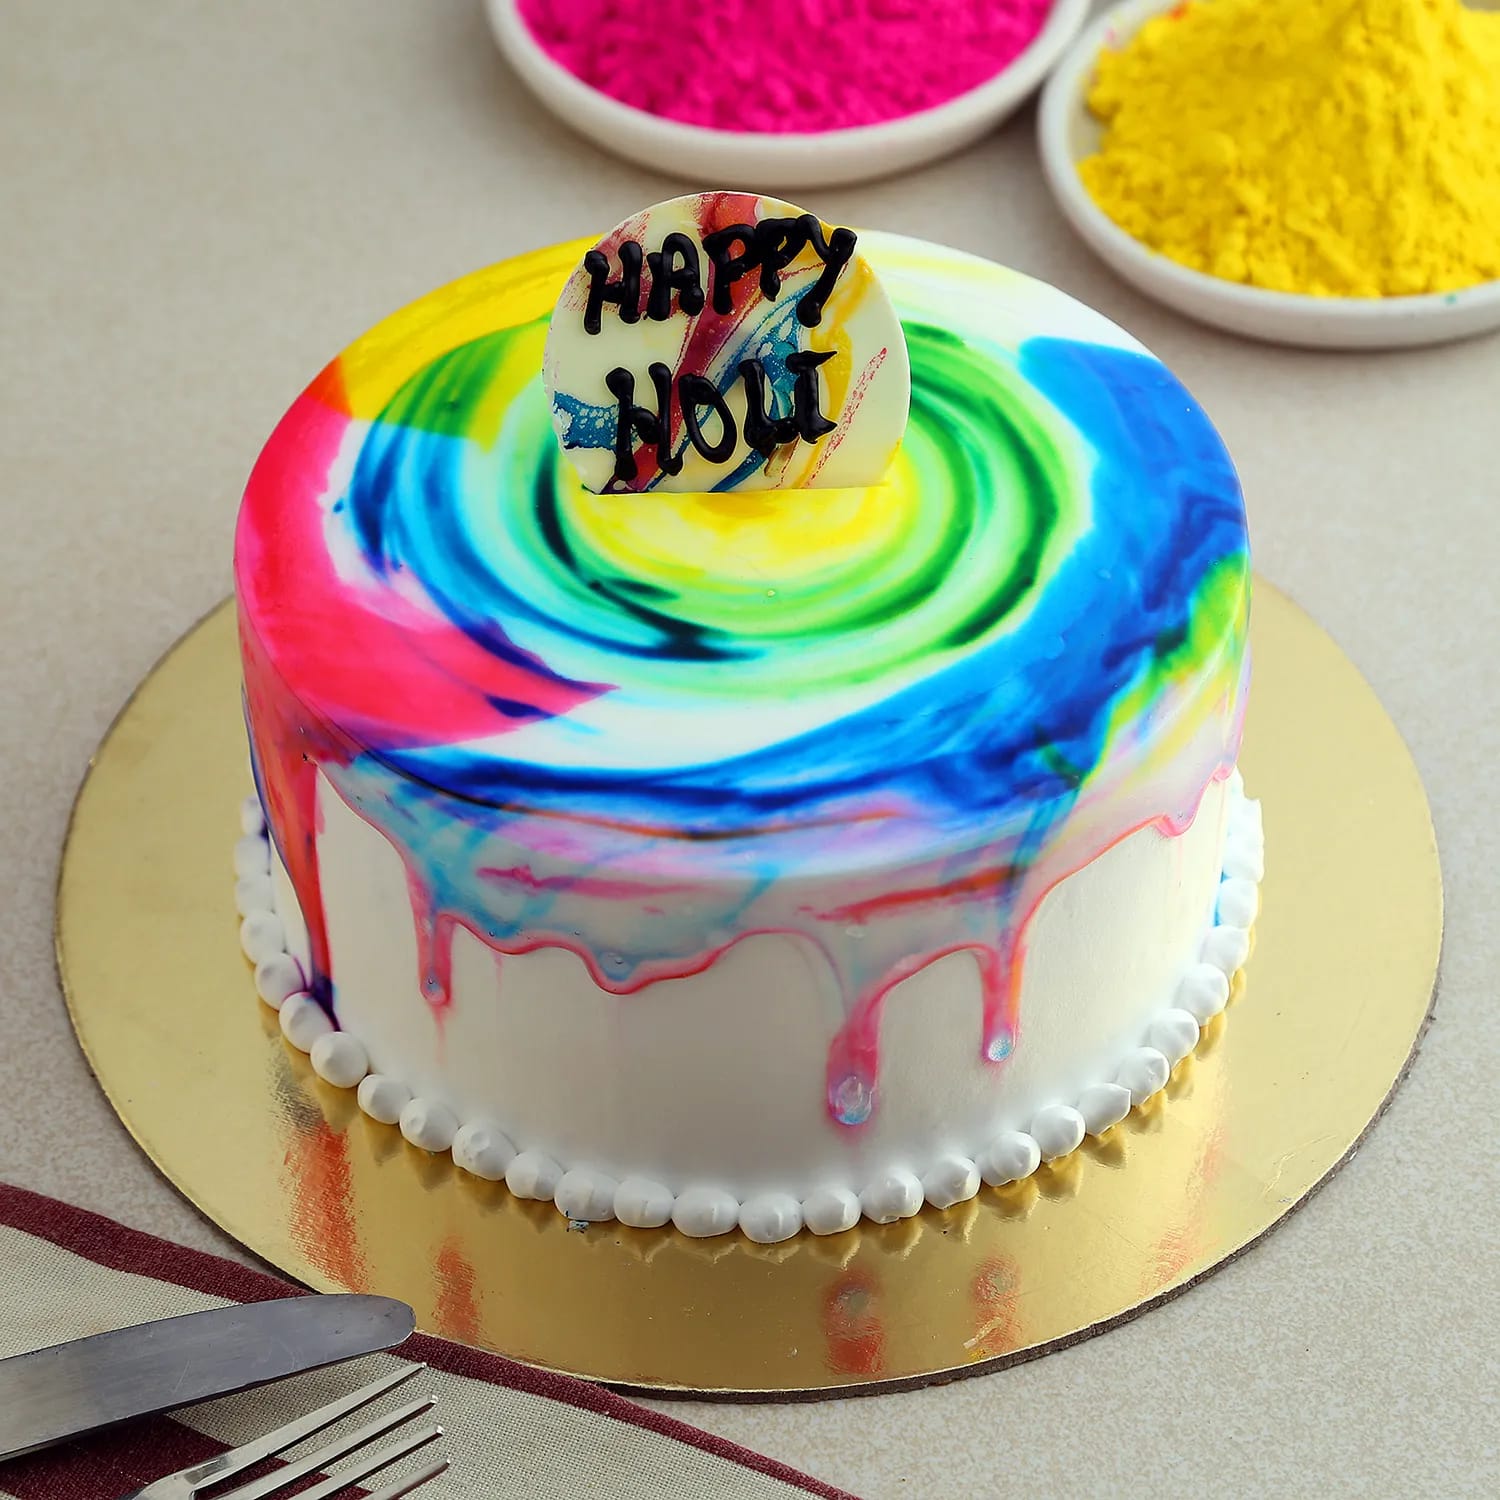 Happy Holi Fresh Cream Cake With Candy Icing Half kg : Gift/Send QFilter  Gifts Online HD1155534 |IGP.com